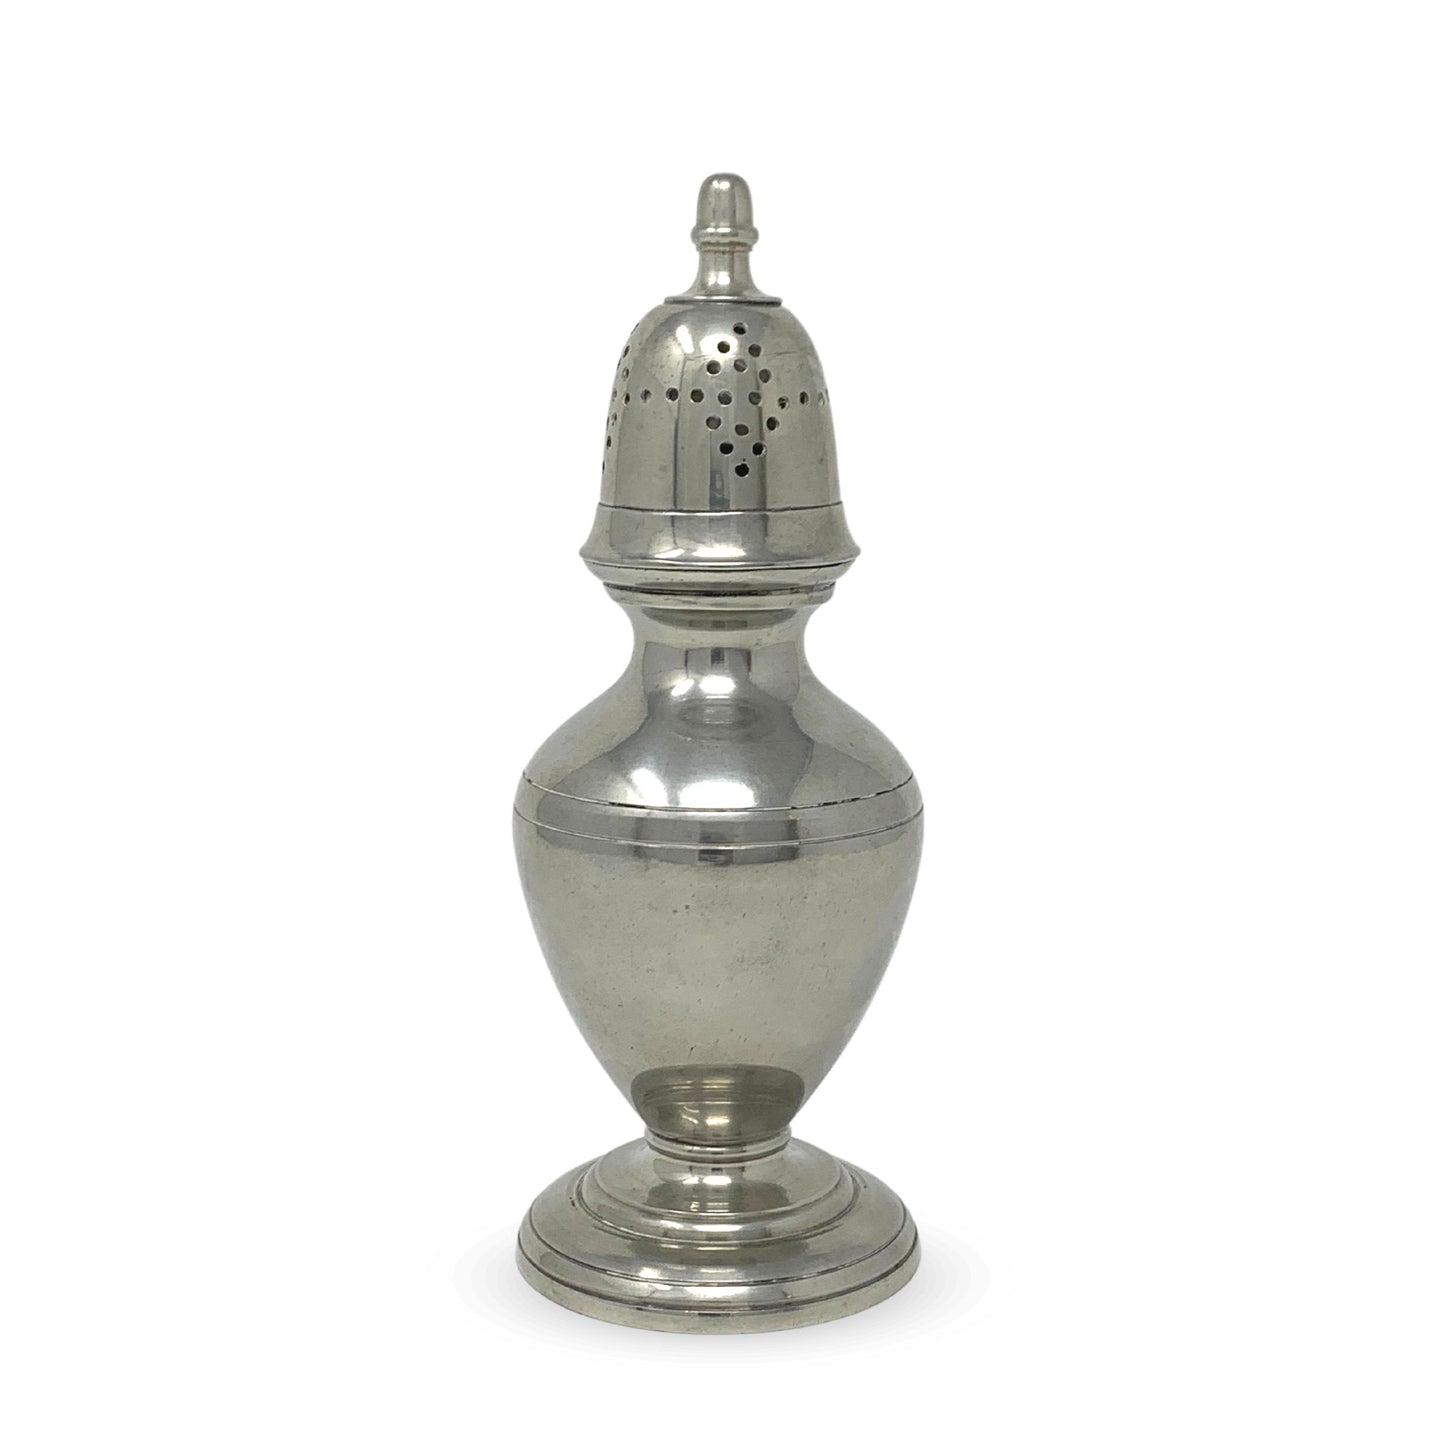 Stieff Pewter Colonial Williamsburg CW-99 Pewter Caster